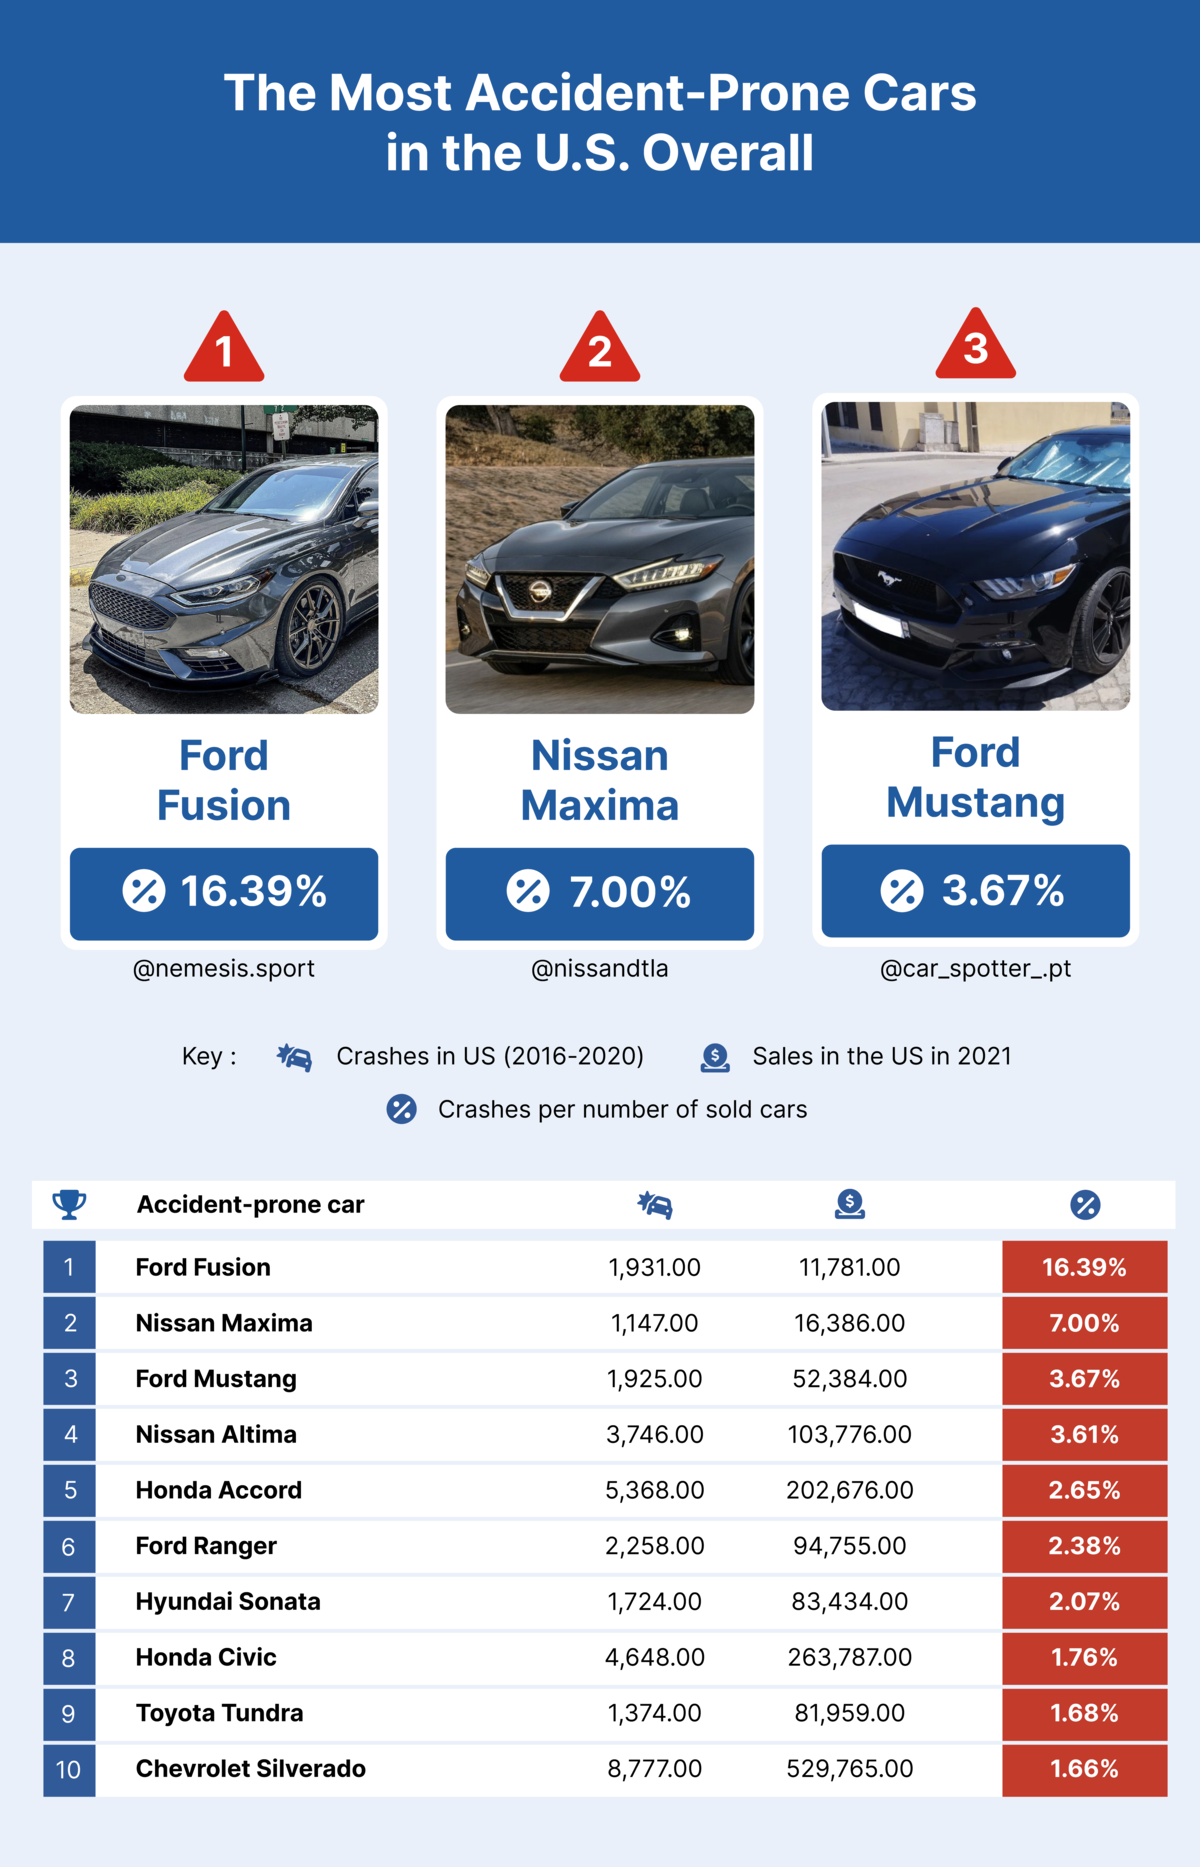 Which Cars Are the Most Crash-Prone?